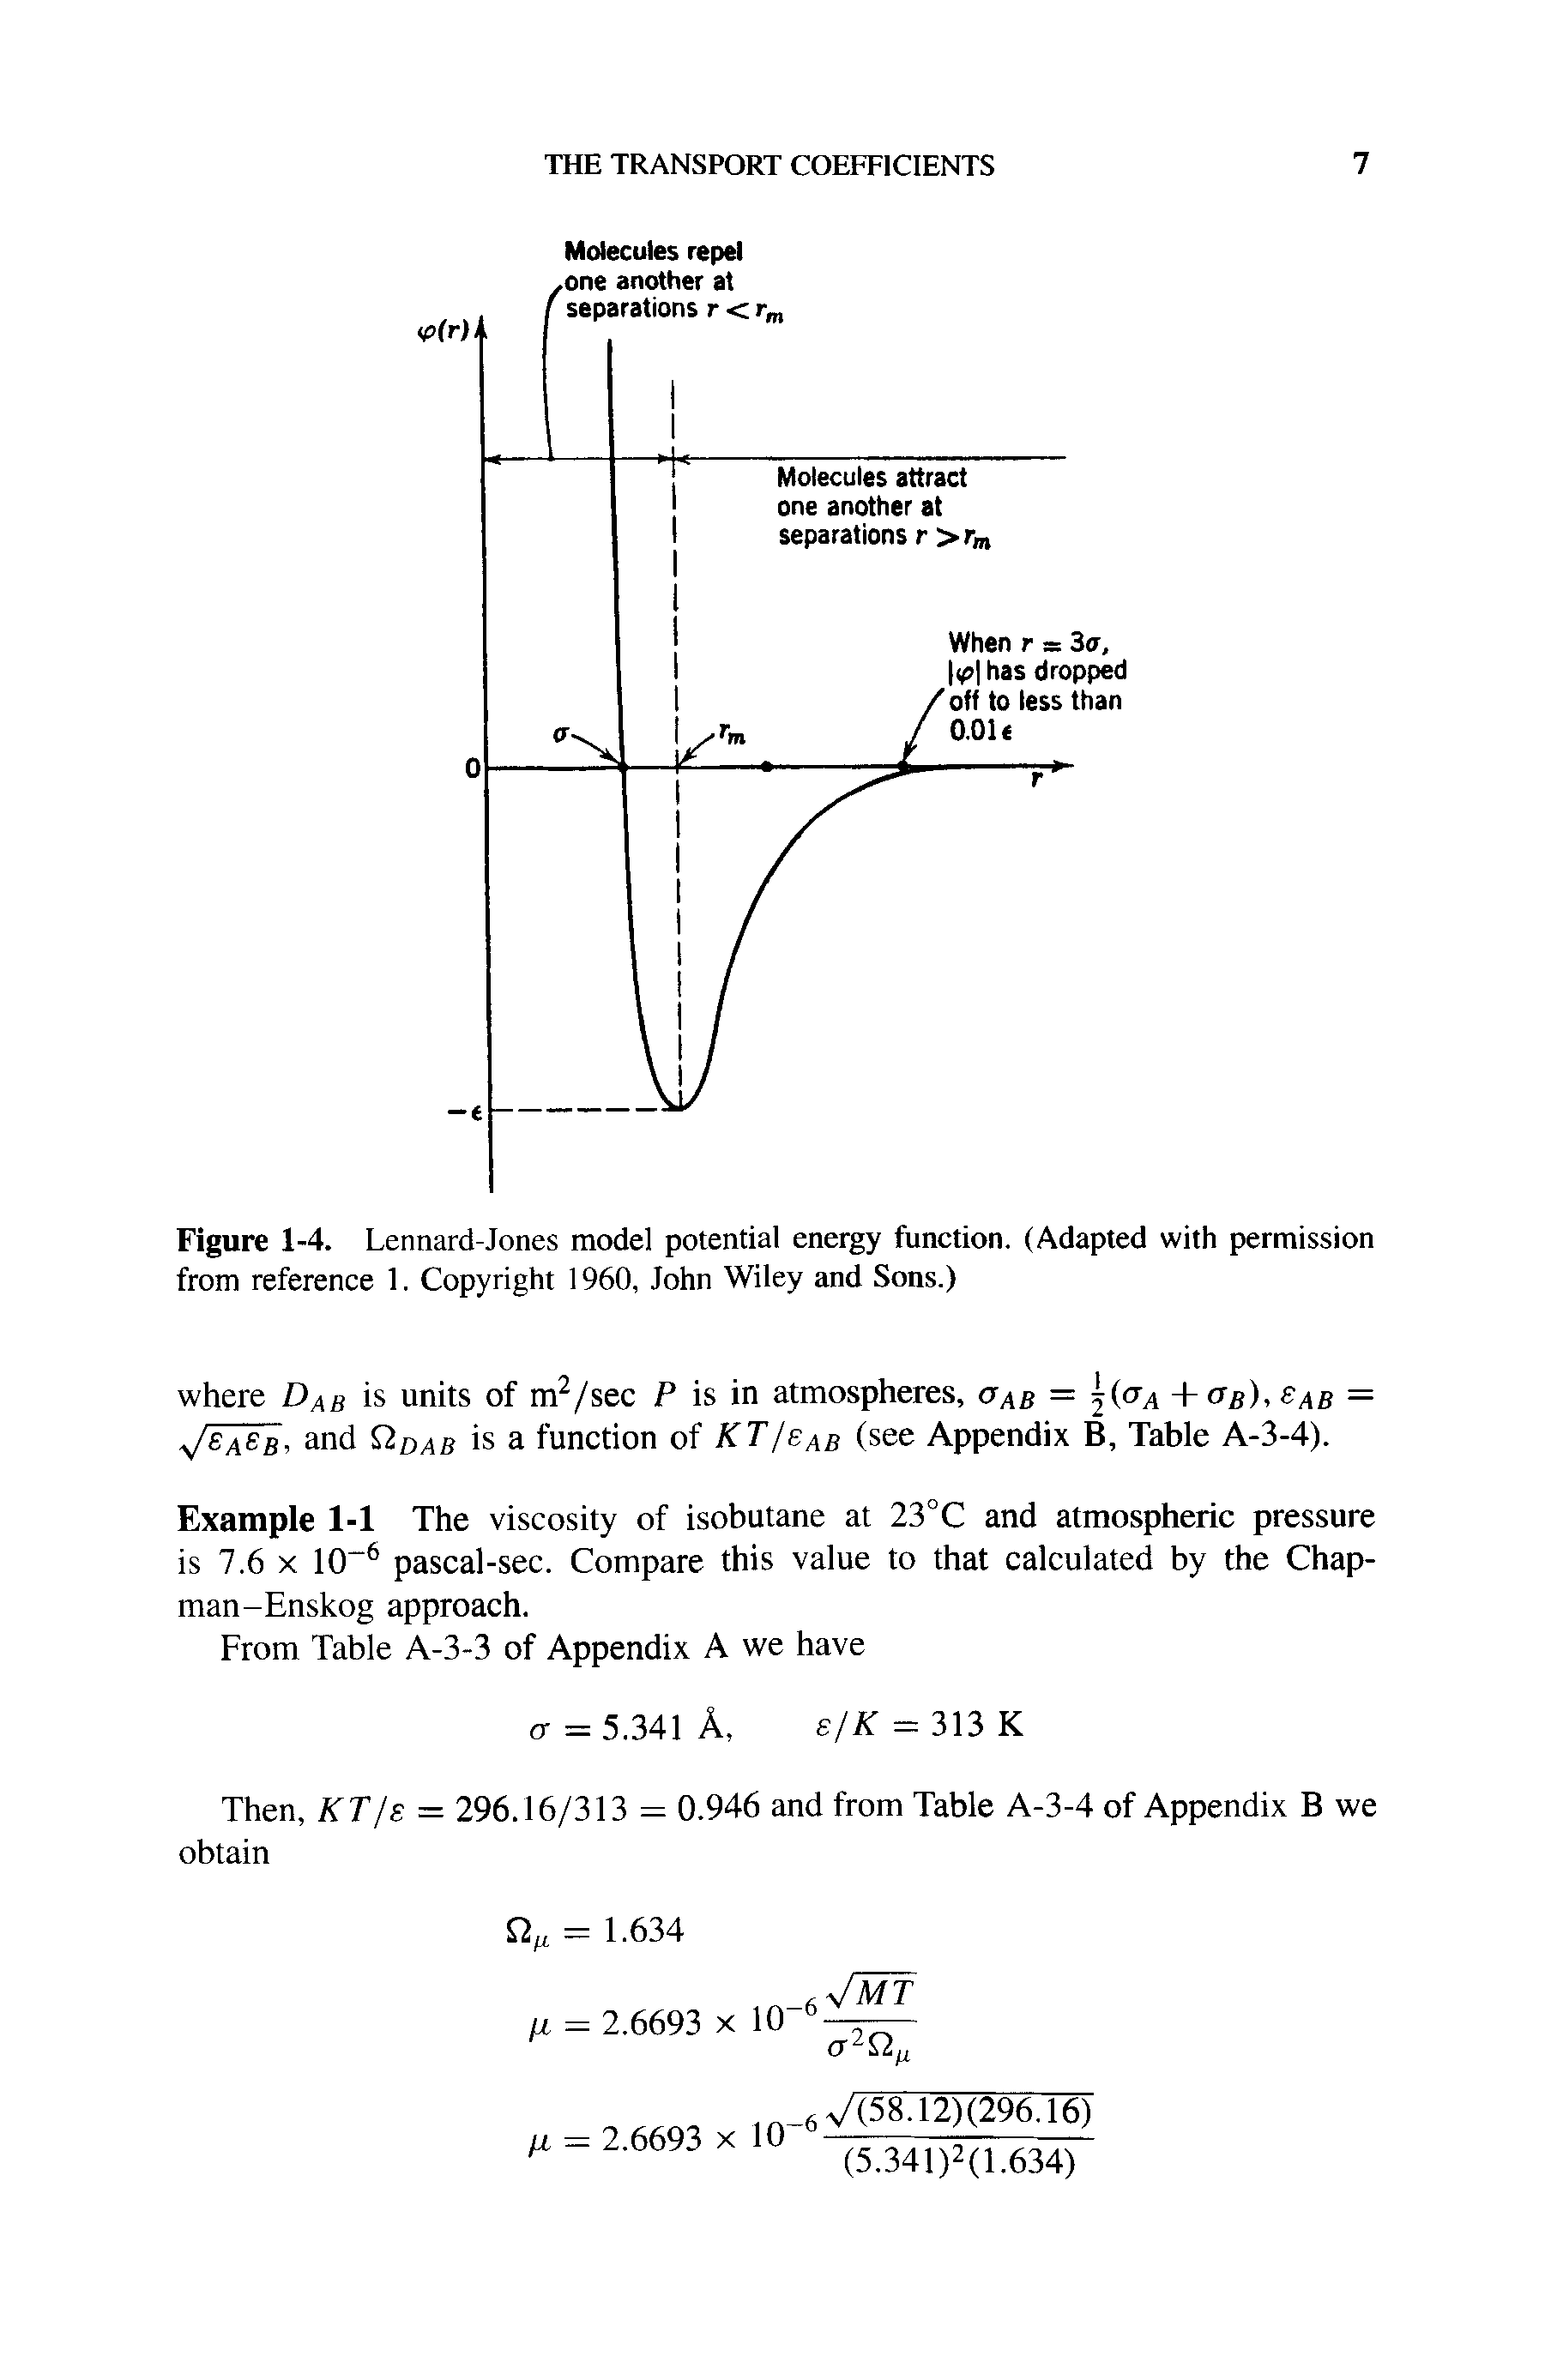 Figure 1-4. Lennard-Jones model potential energy function. (Adapted with permission from reference 1. Copyright 1960, John Wiley and Sons.)...